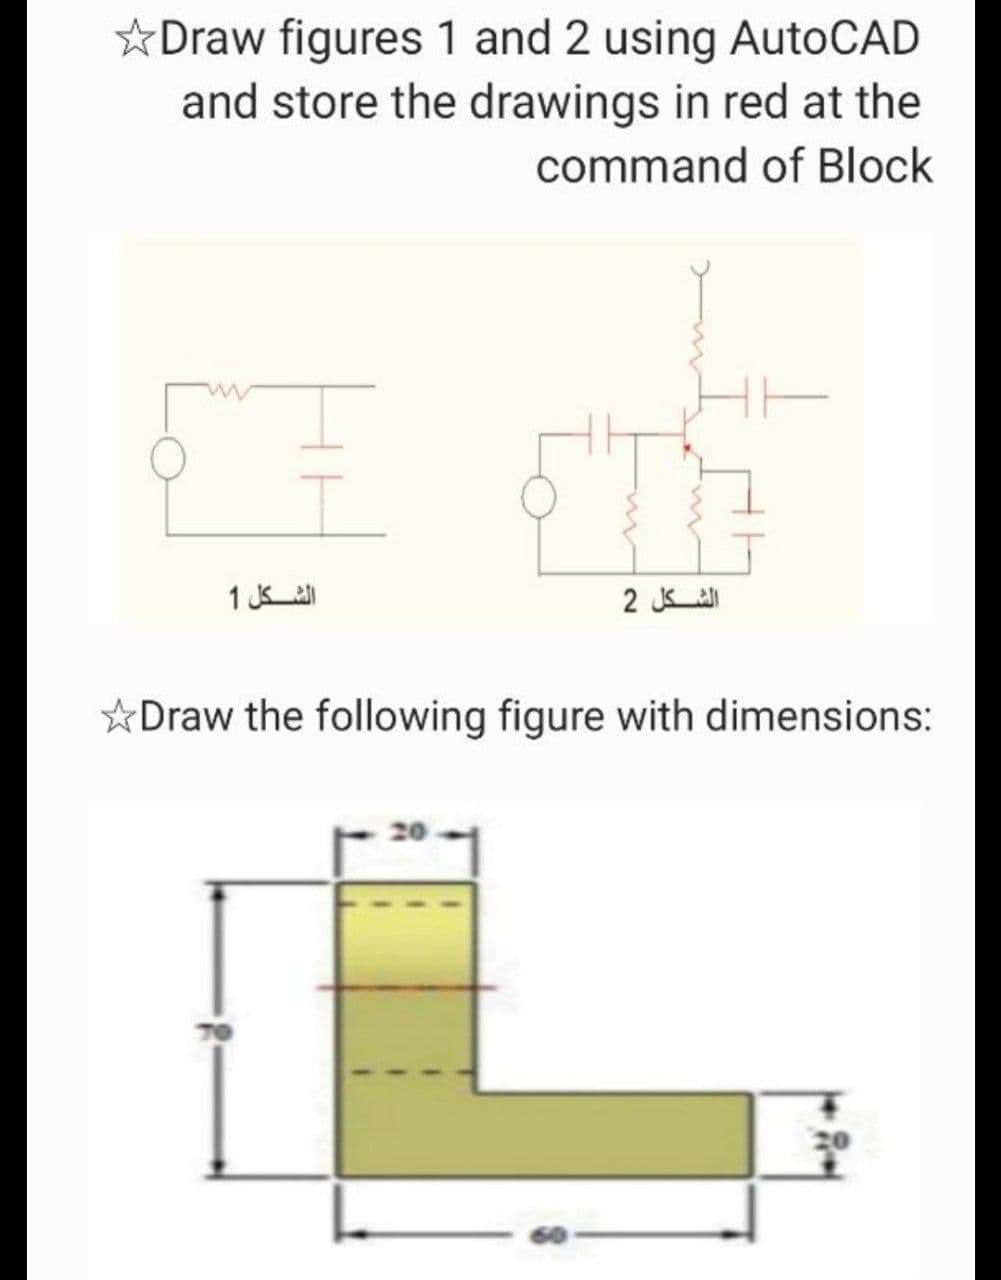 ☆Draw figures 1 and 2 using AutoCAD
and store the drawings in red at the
command of Block
الشكل 1
الشكل 2
☆Draw the following figure with dimensions:
20